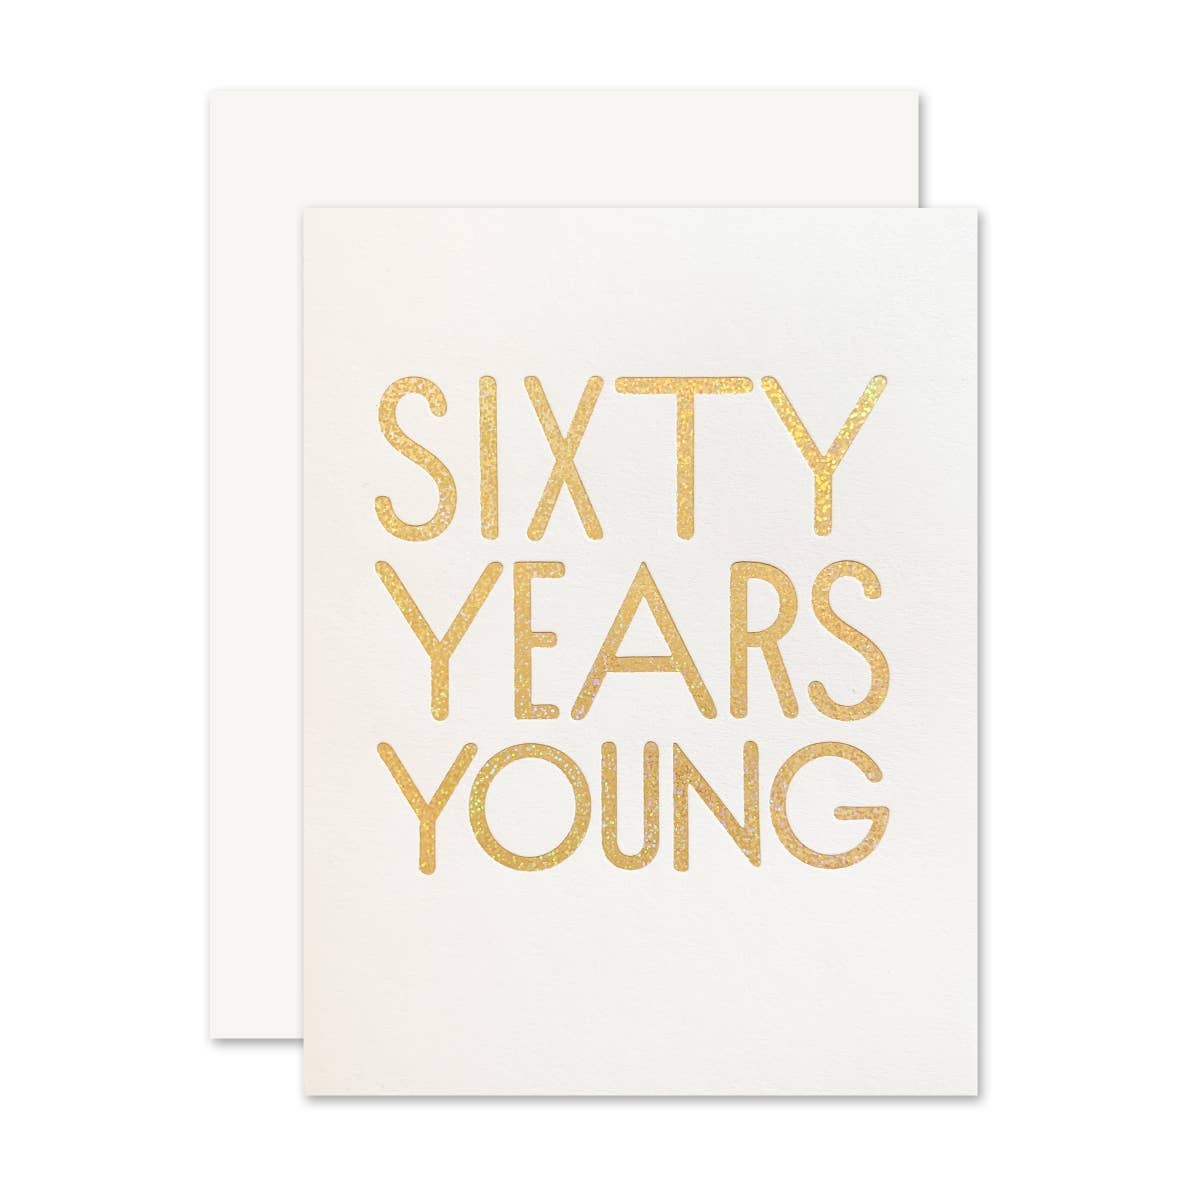 White card with gold foil text saying, “Sixty Years Young”. A white envelope is included.